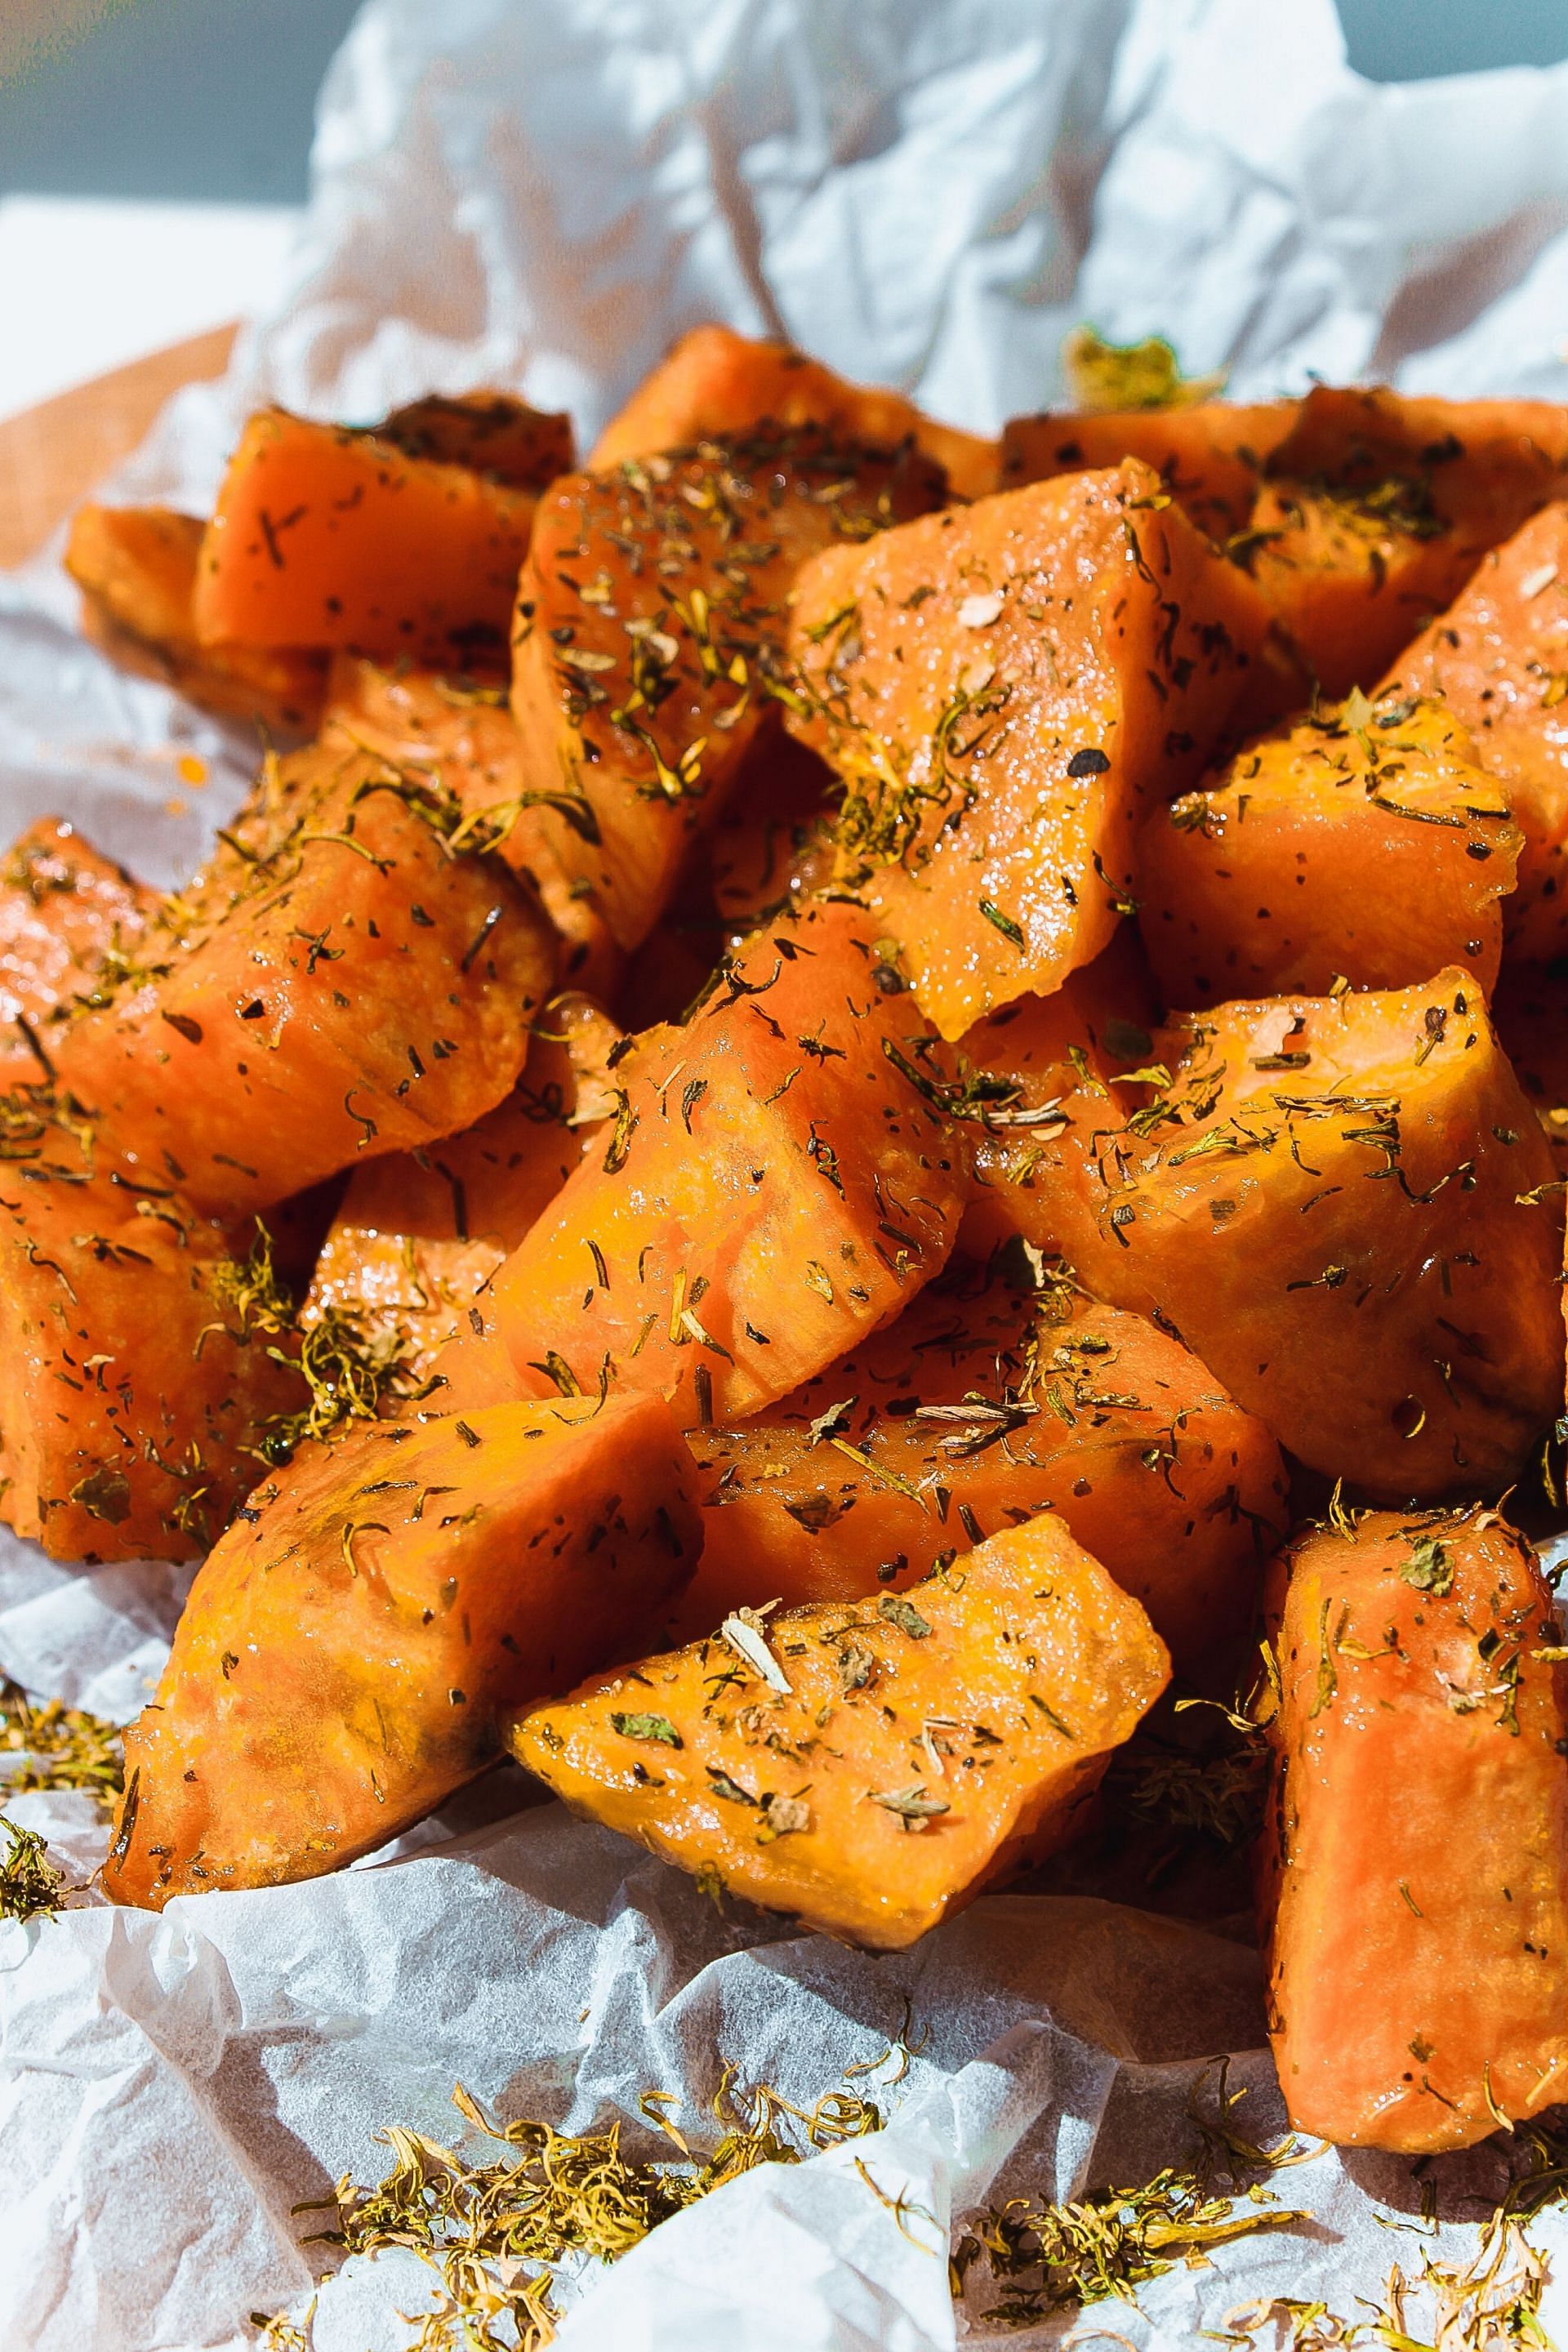 Sweet potatoes are a great source of B7 (Image via Pexels)